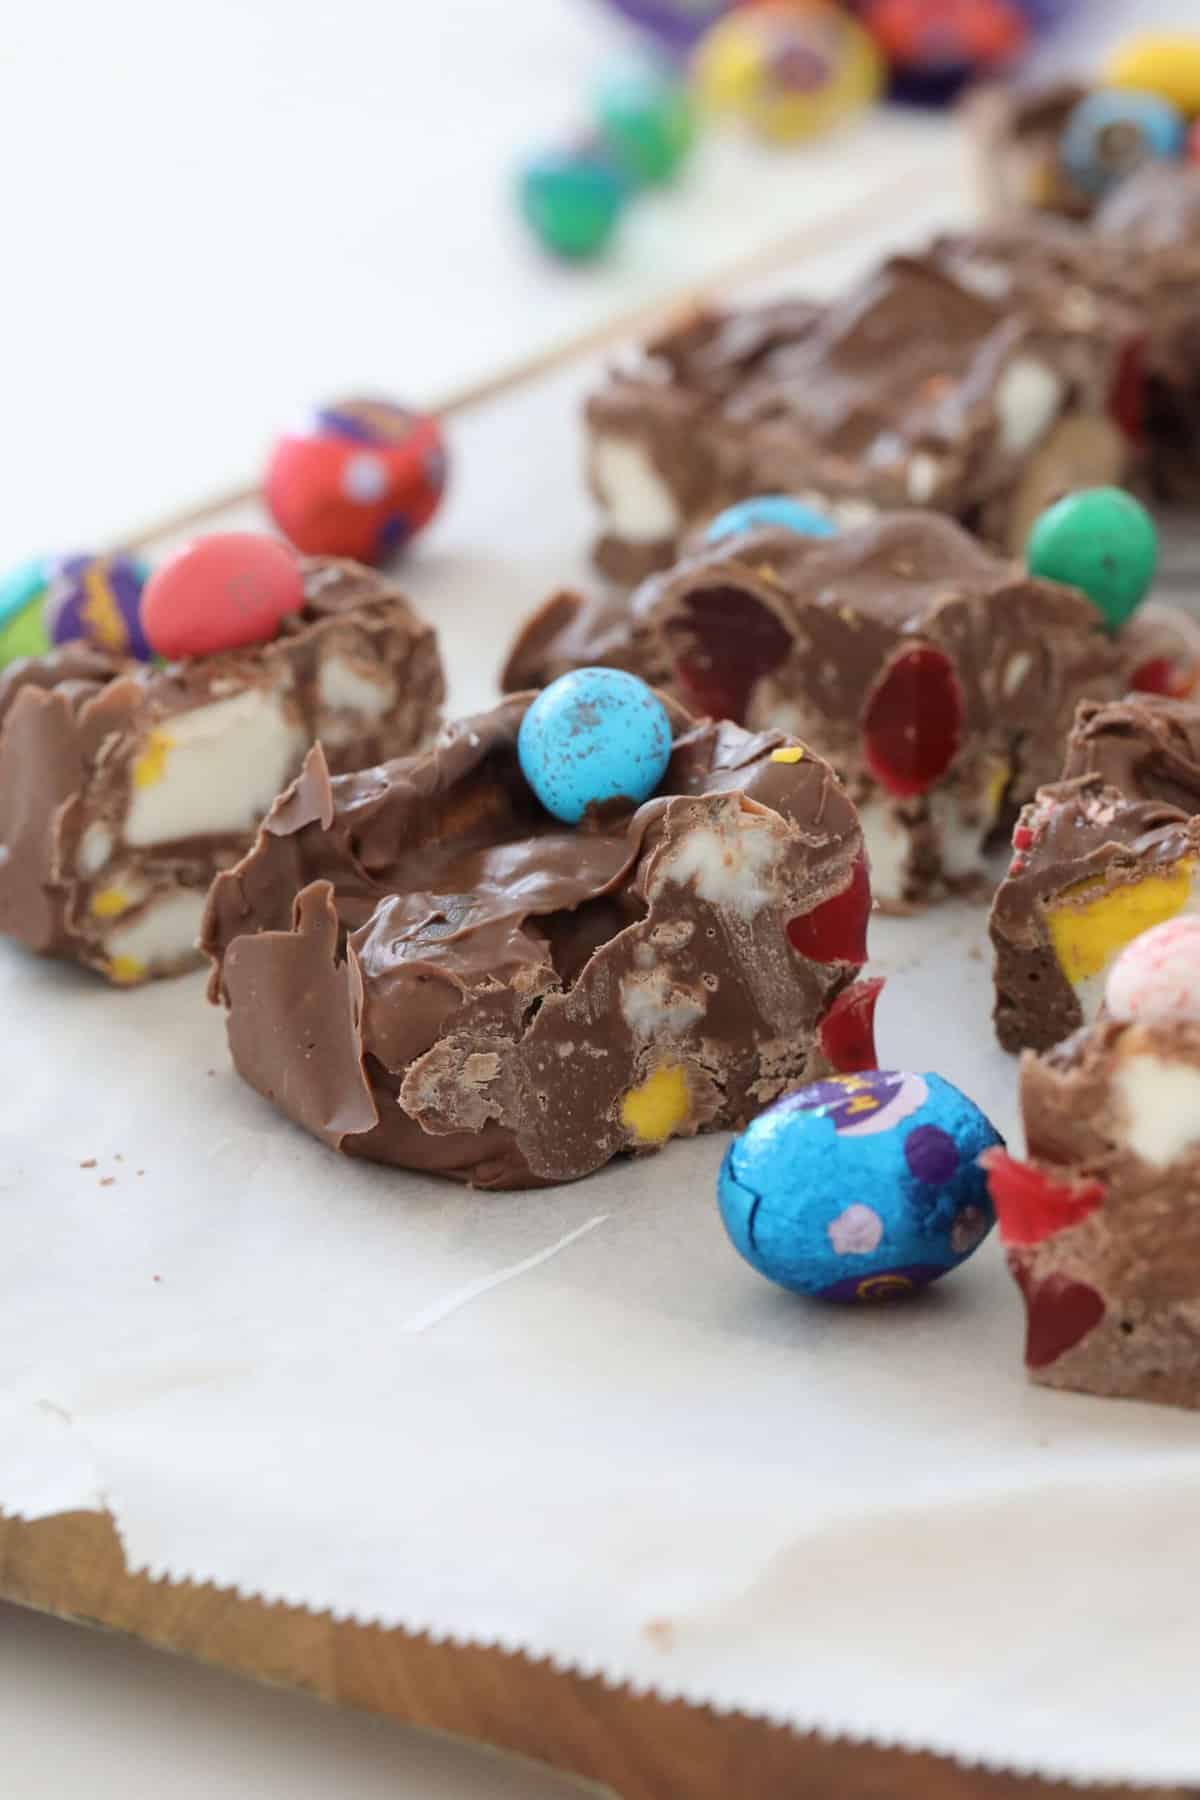 Chocolate squares with marshmallows, lollies and easter eggs.